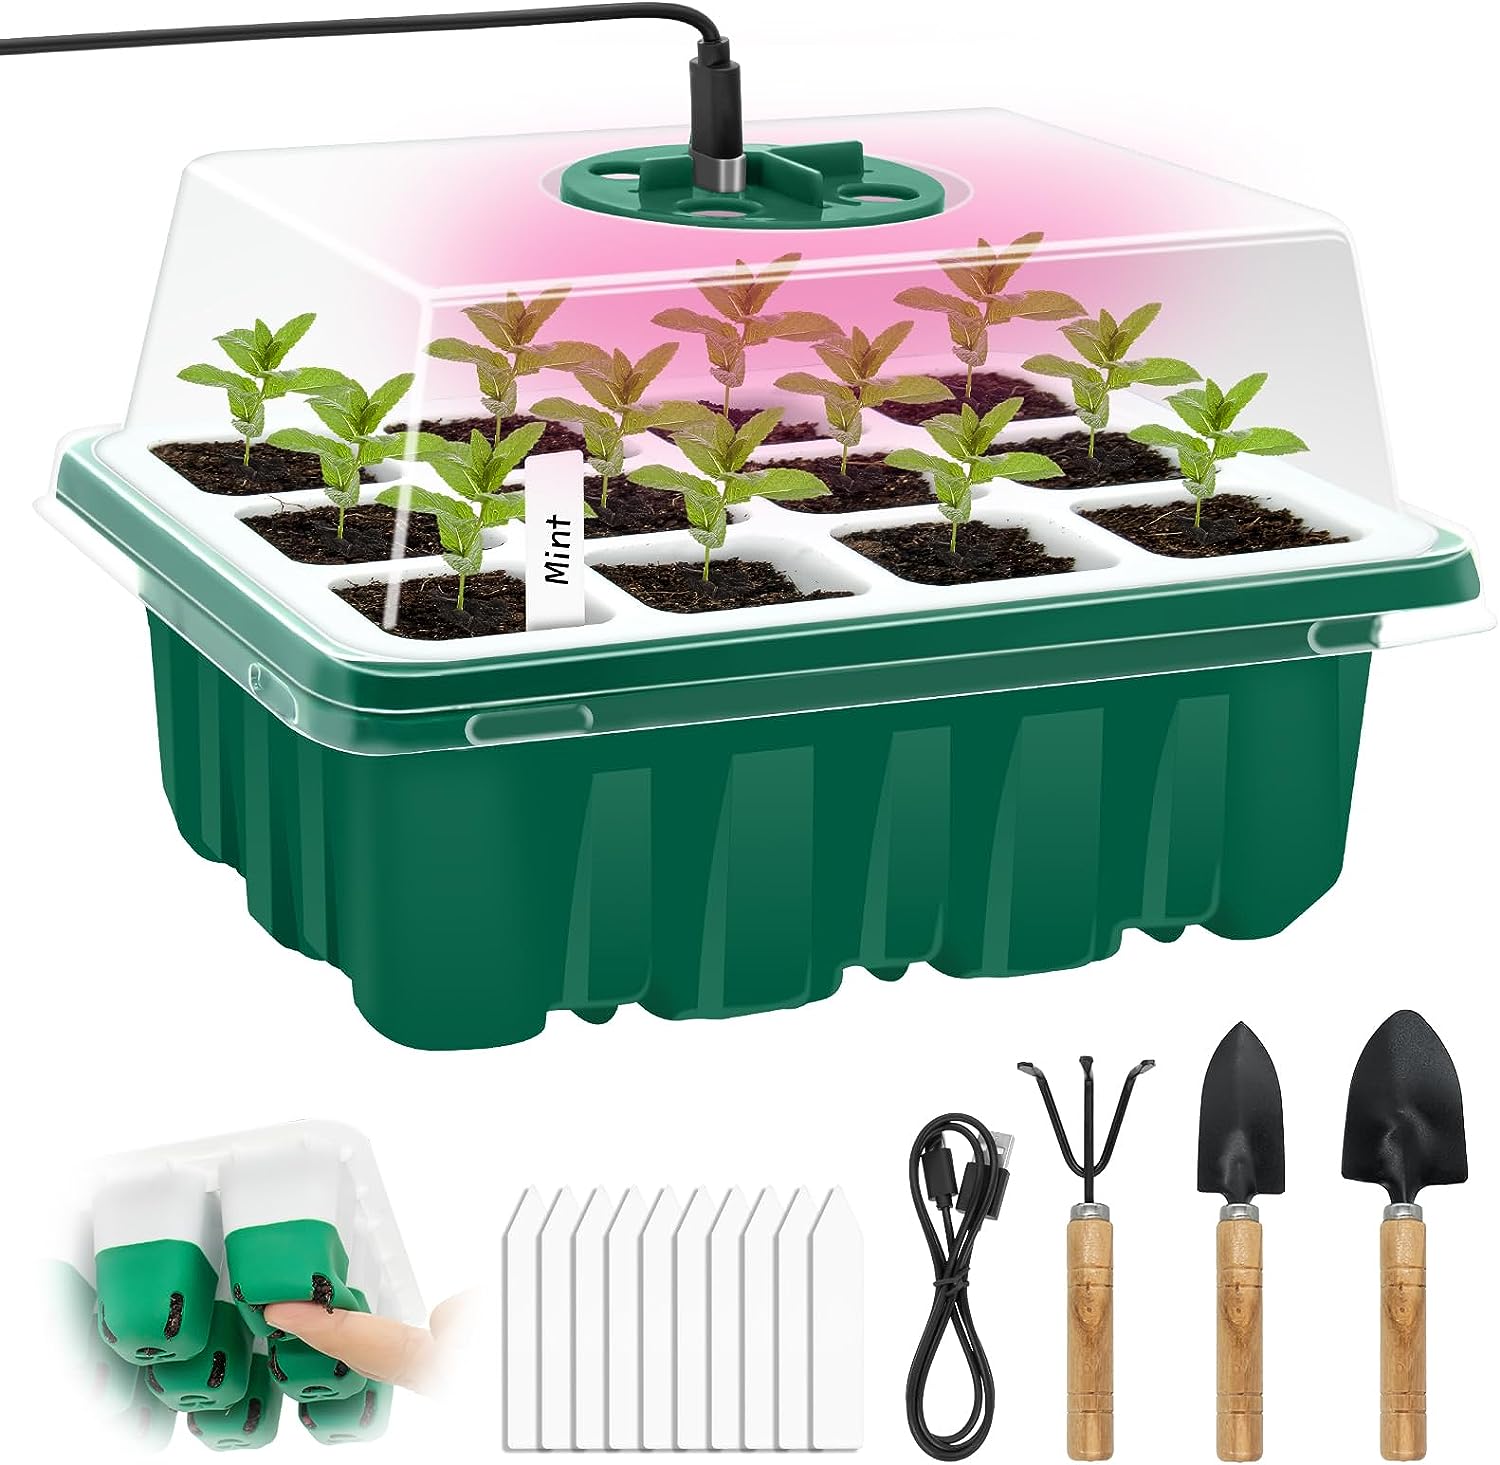 GrJyls Seed Starter Tray Kit with Grow Light